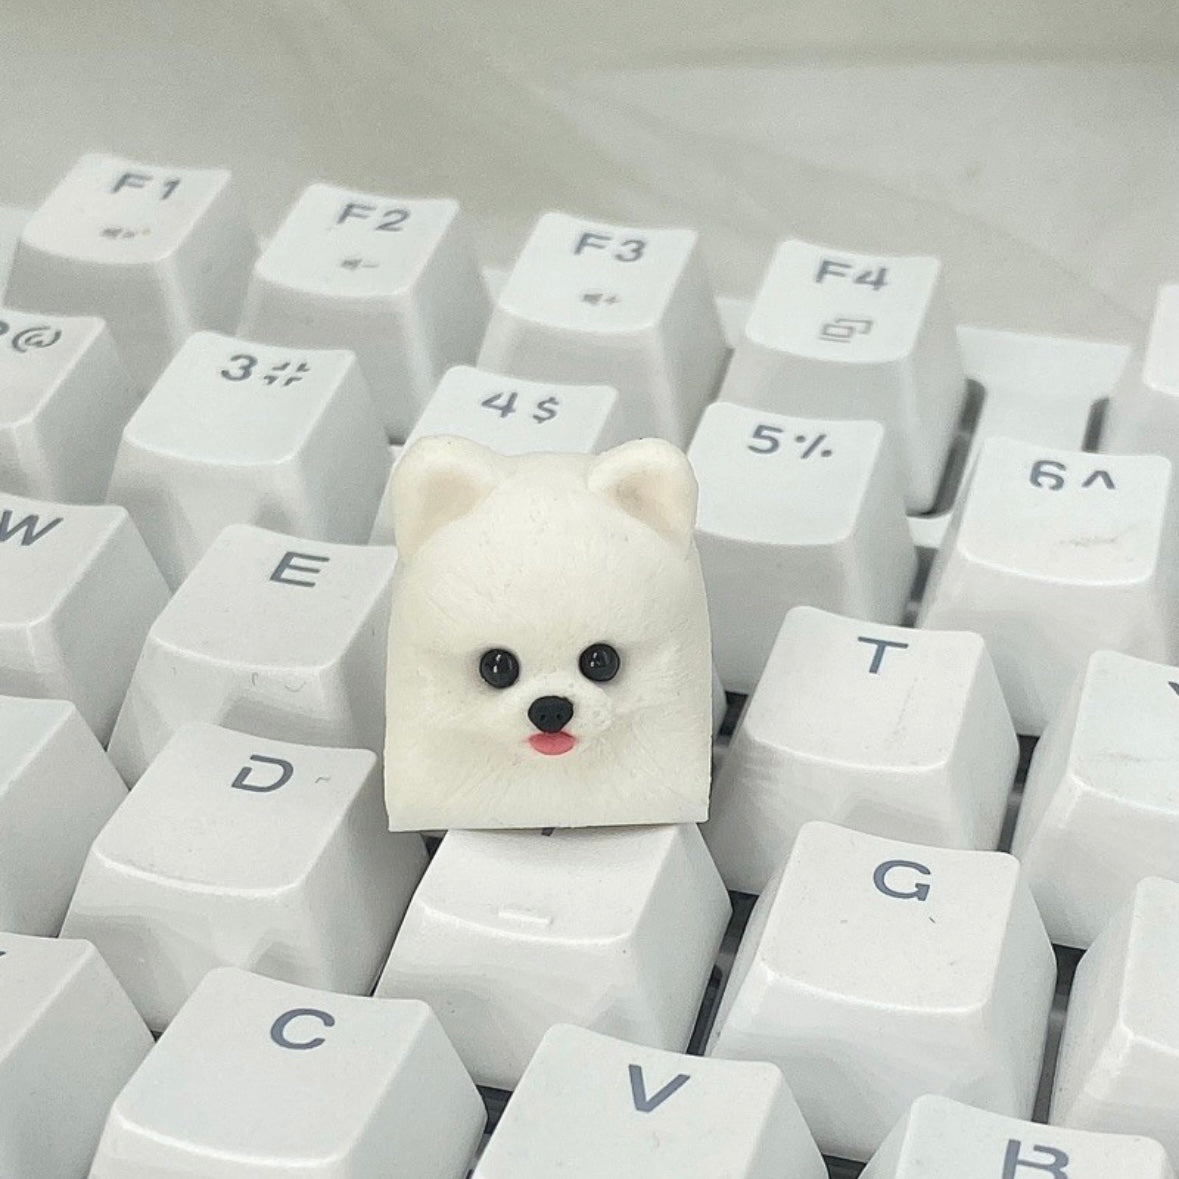 Artisan-Keycaps-for-Cats-and-Dogs-Customize-your-artisan-keycaps_7